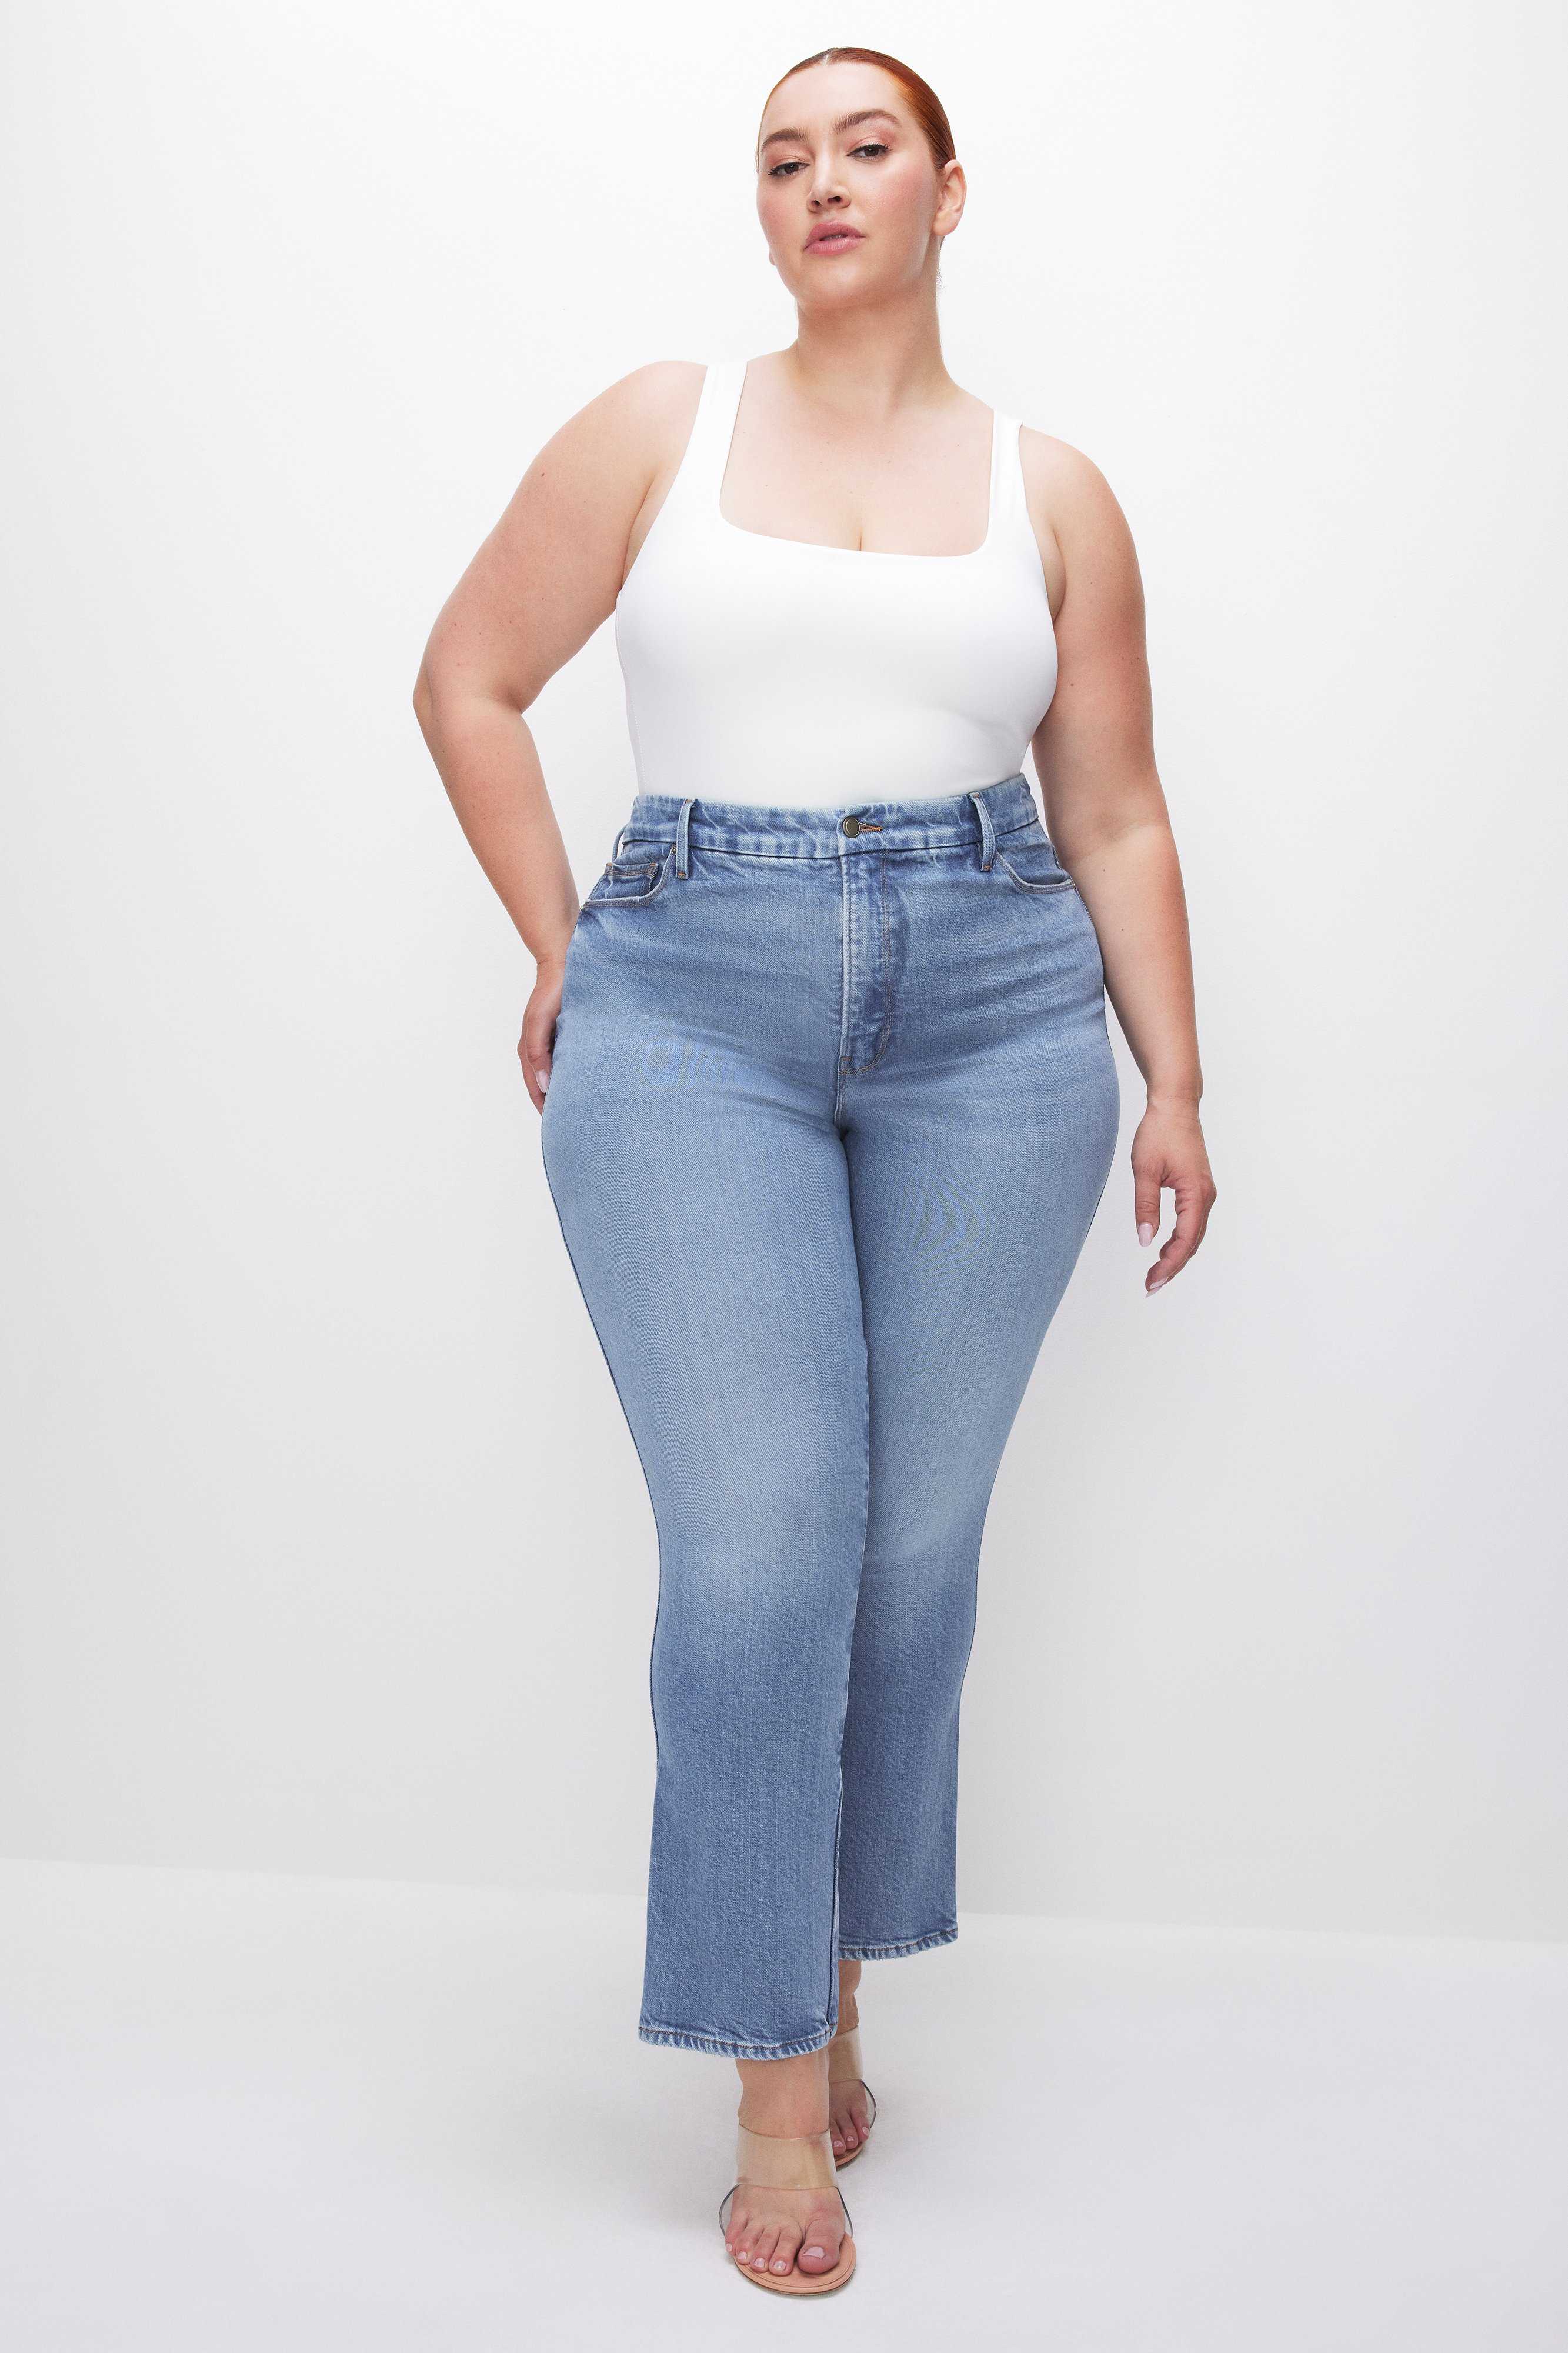 8 Best Jeans for Curvy Women, Tested and Reviewed